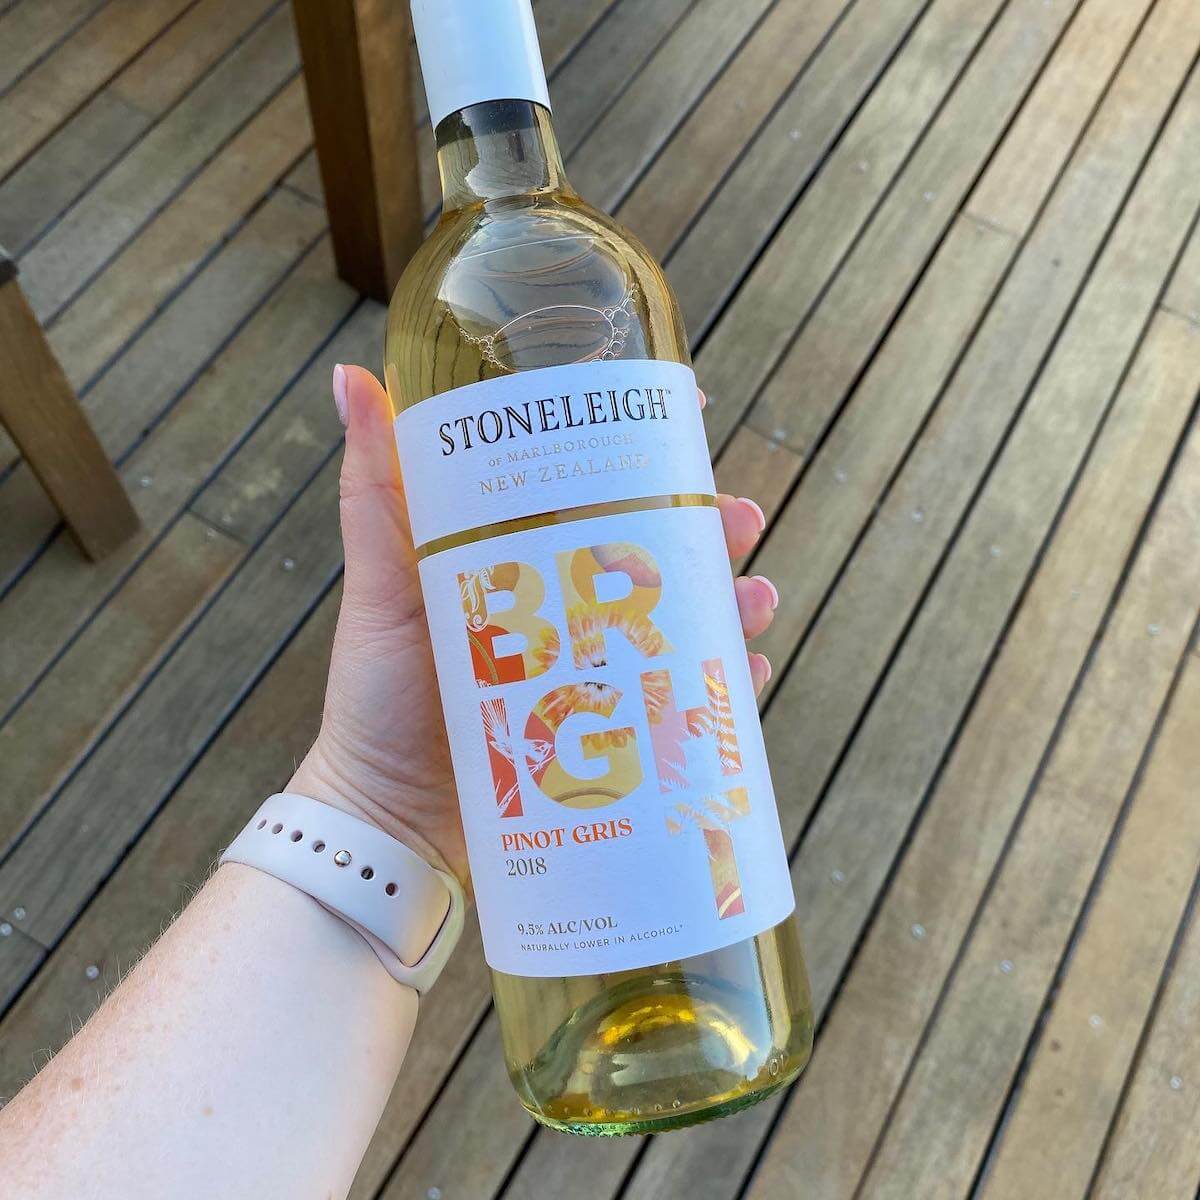 Stoneleigh Bright 2018 Pinot Gris – Lower in Alcohol Wine